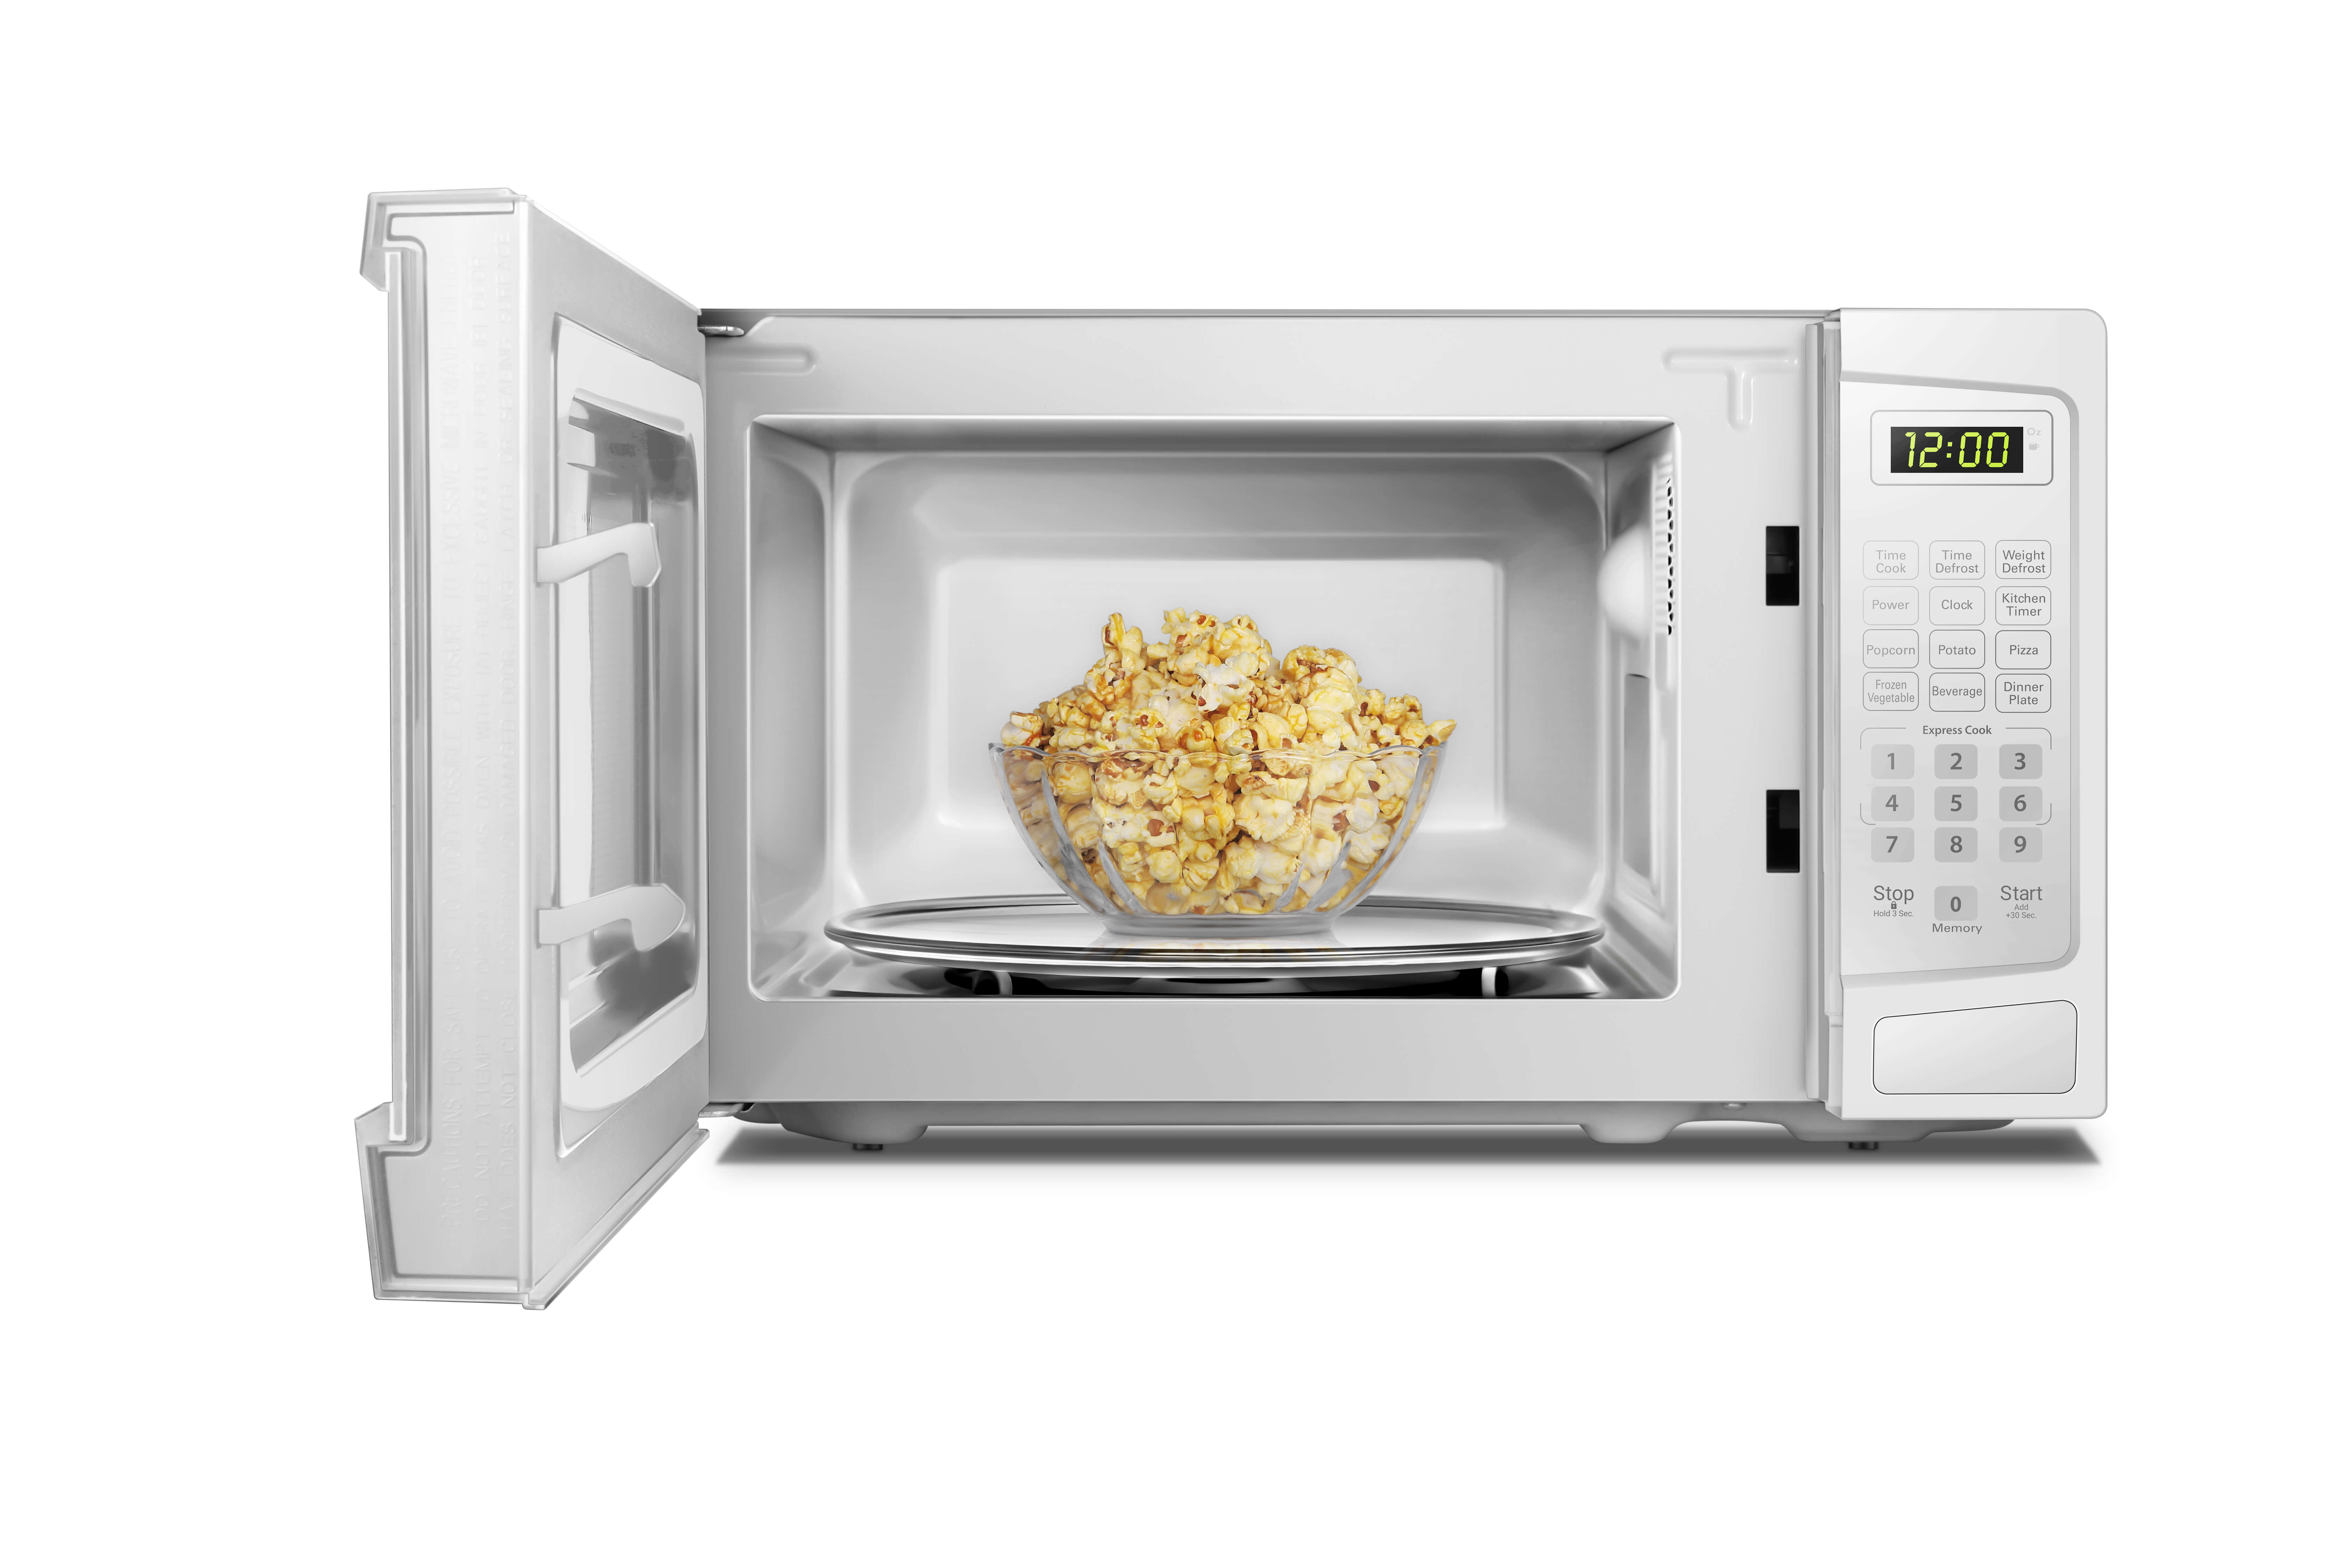 Danby 0.9 cuft White Microwave